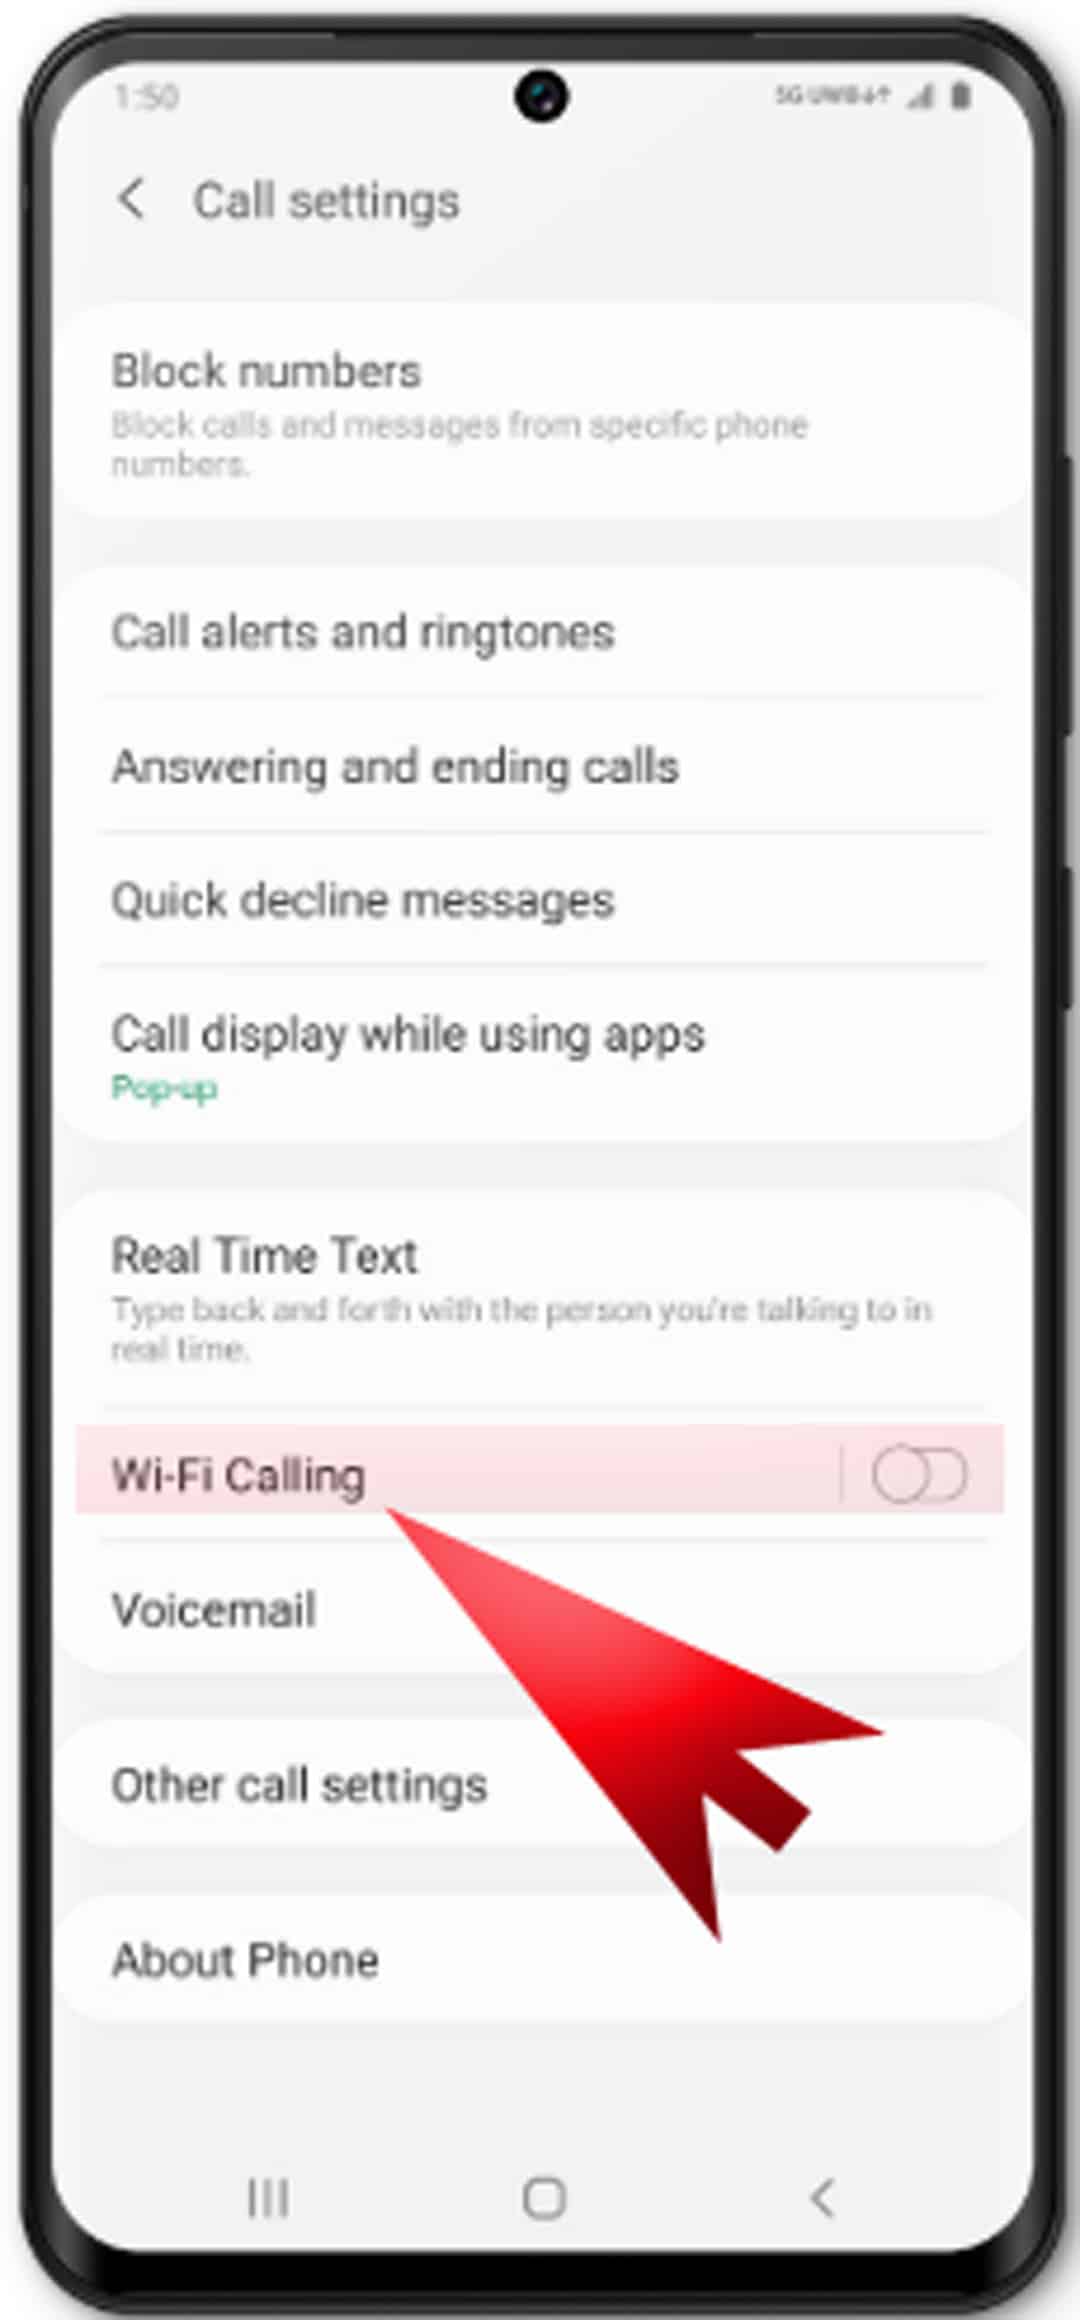 Samsung Wi-Fi Calling 7.0.06.3 for Android - Download